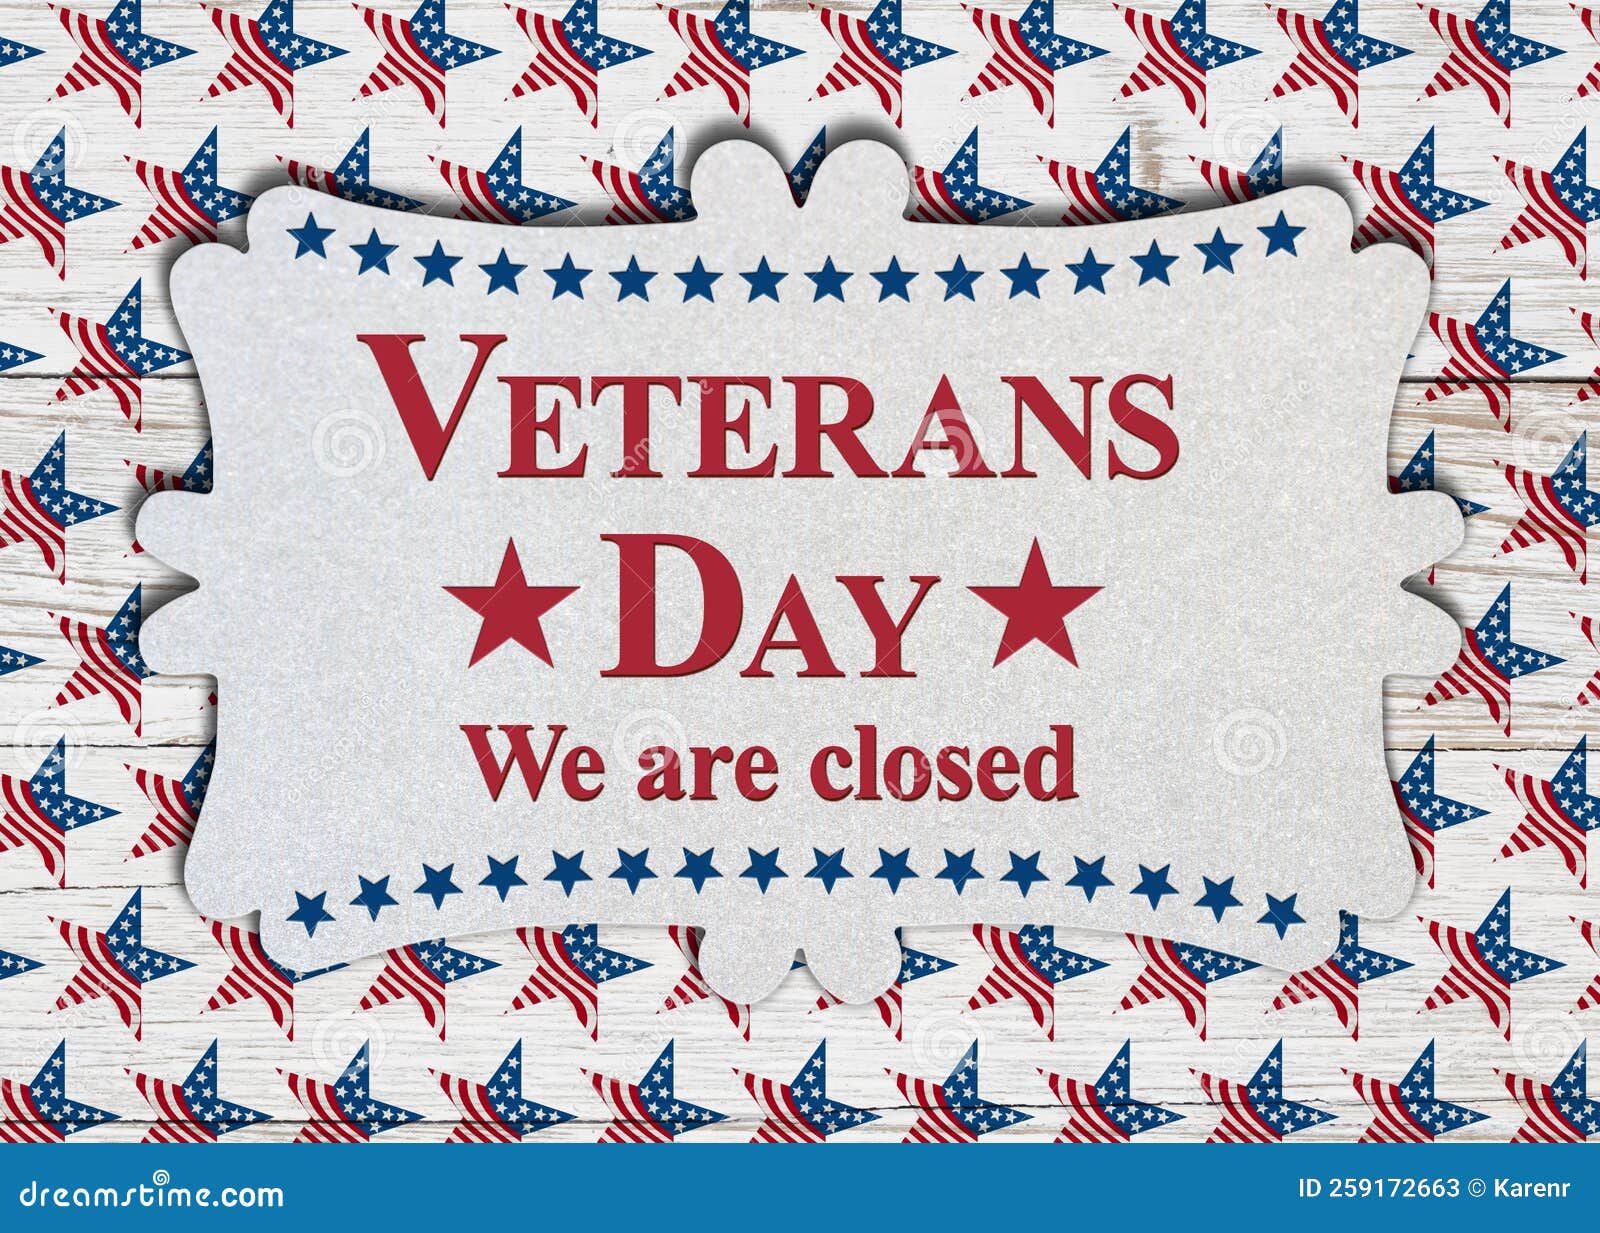 Closed Veterans Day Sign with Flag on Wood Stock Image Image of star